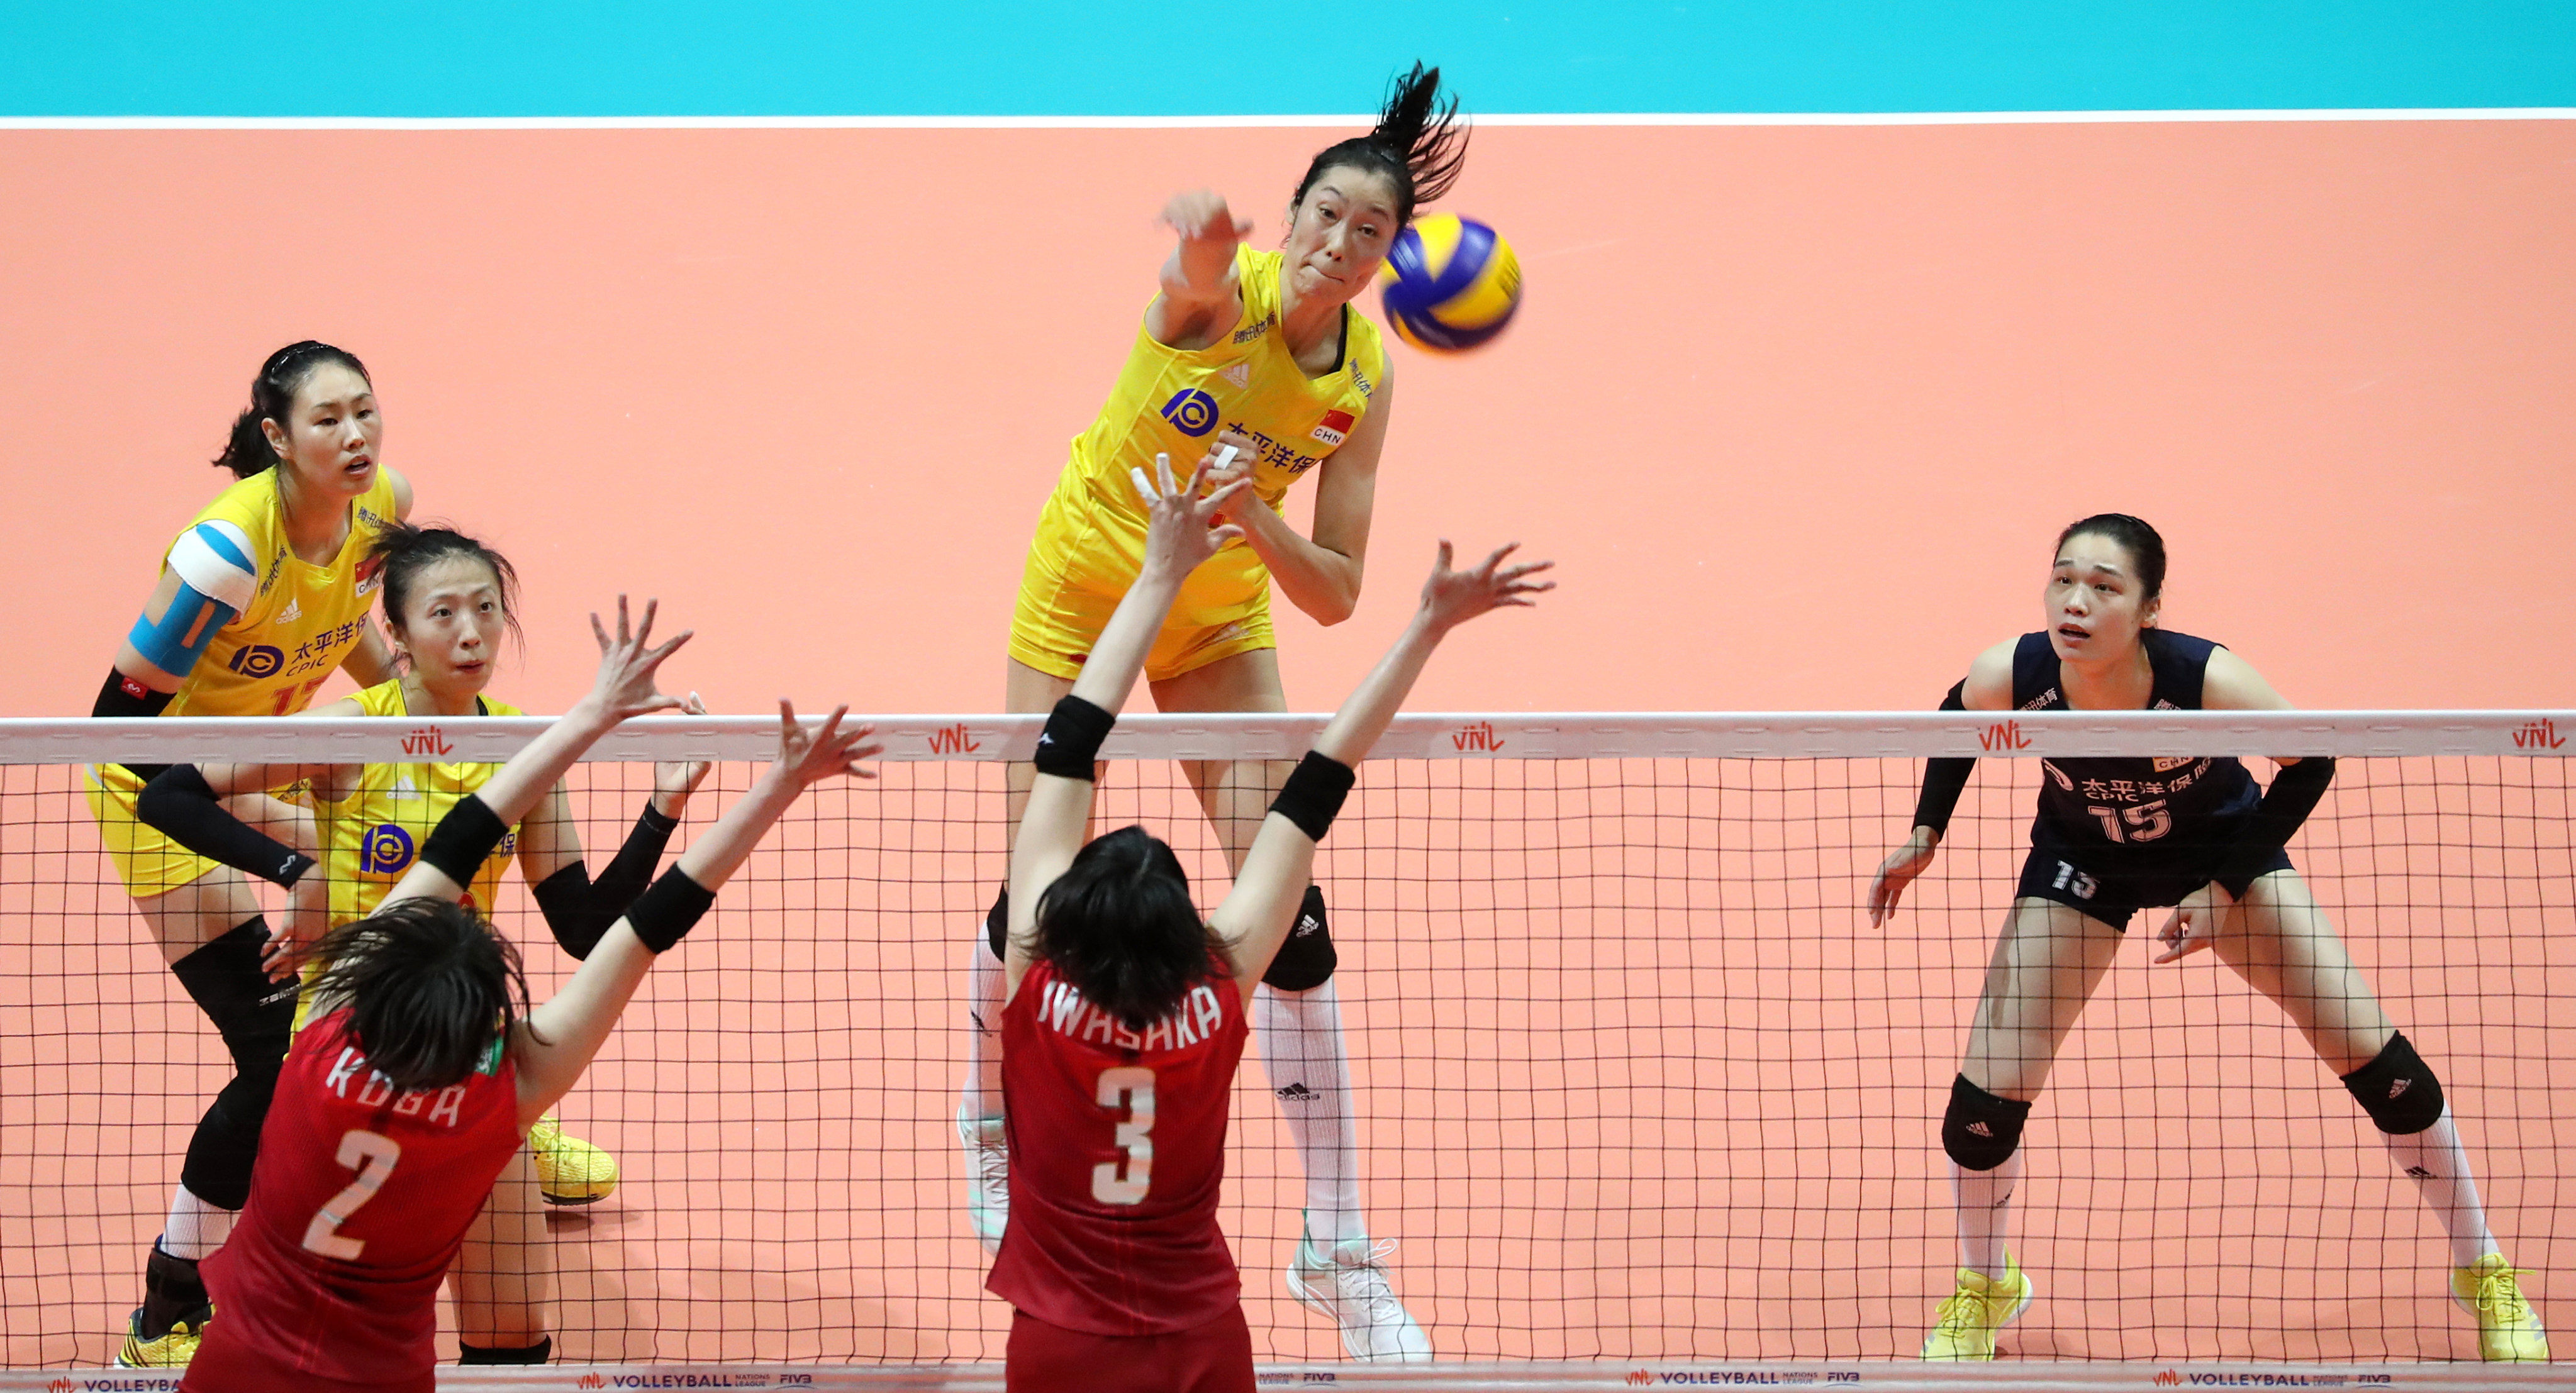 Zhu Ting of China spikes the ball during the FIVB Women’s Volleyball Nations League game against Japan at the Coliseum in Hung Hom in June 2019. Photo: K. Y. Cheng